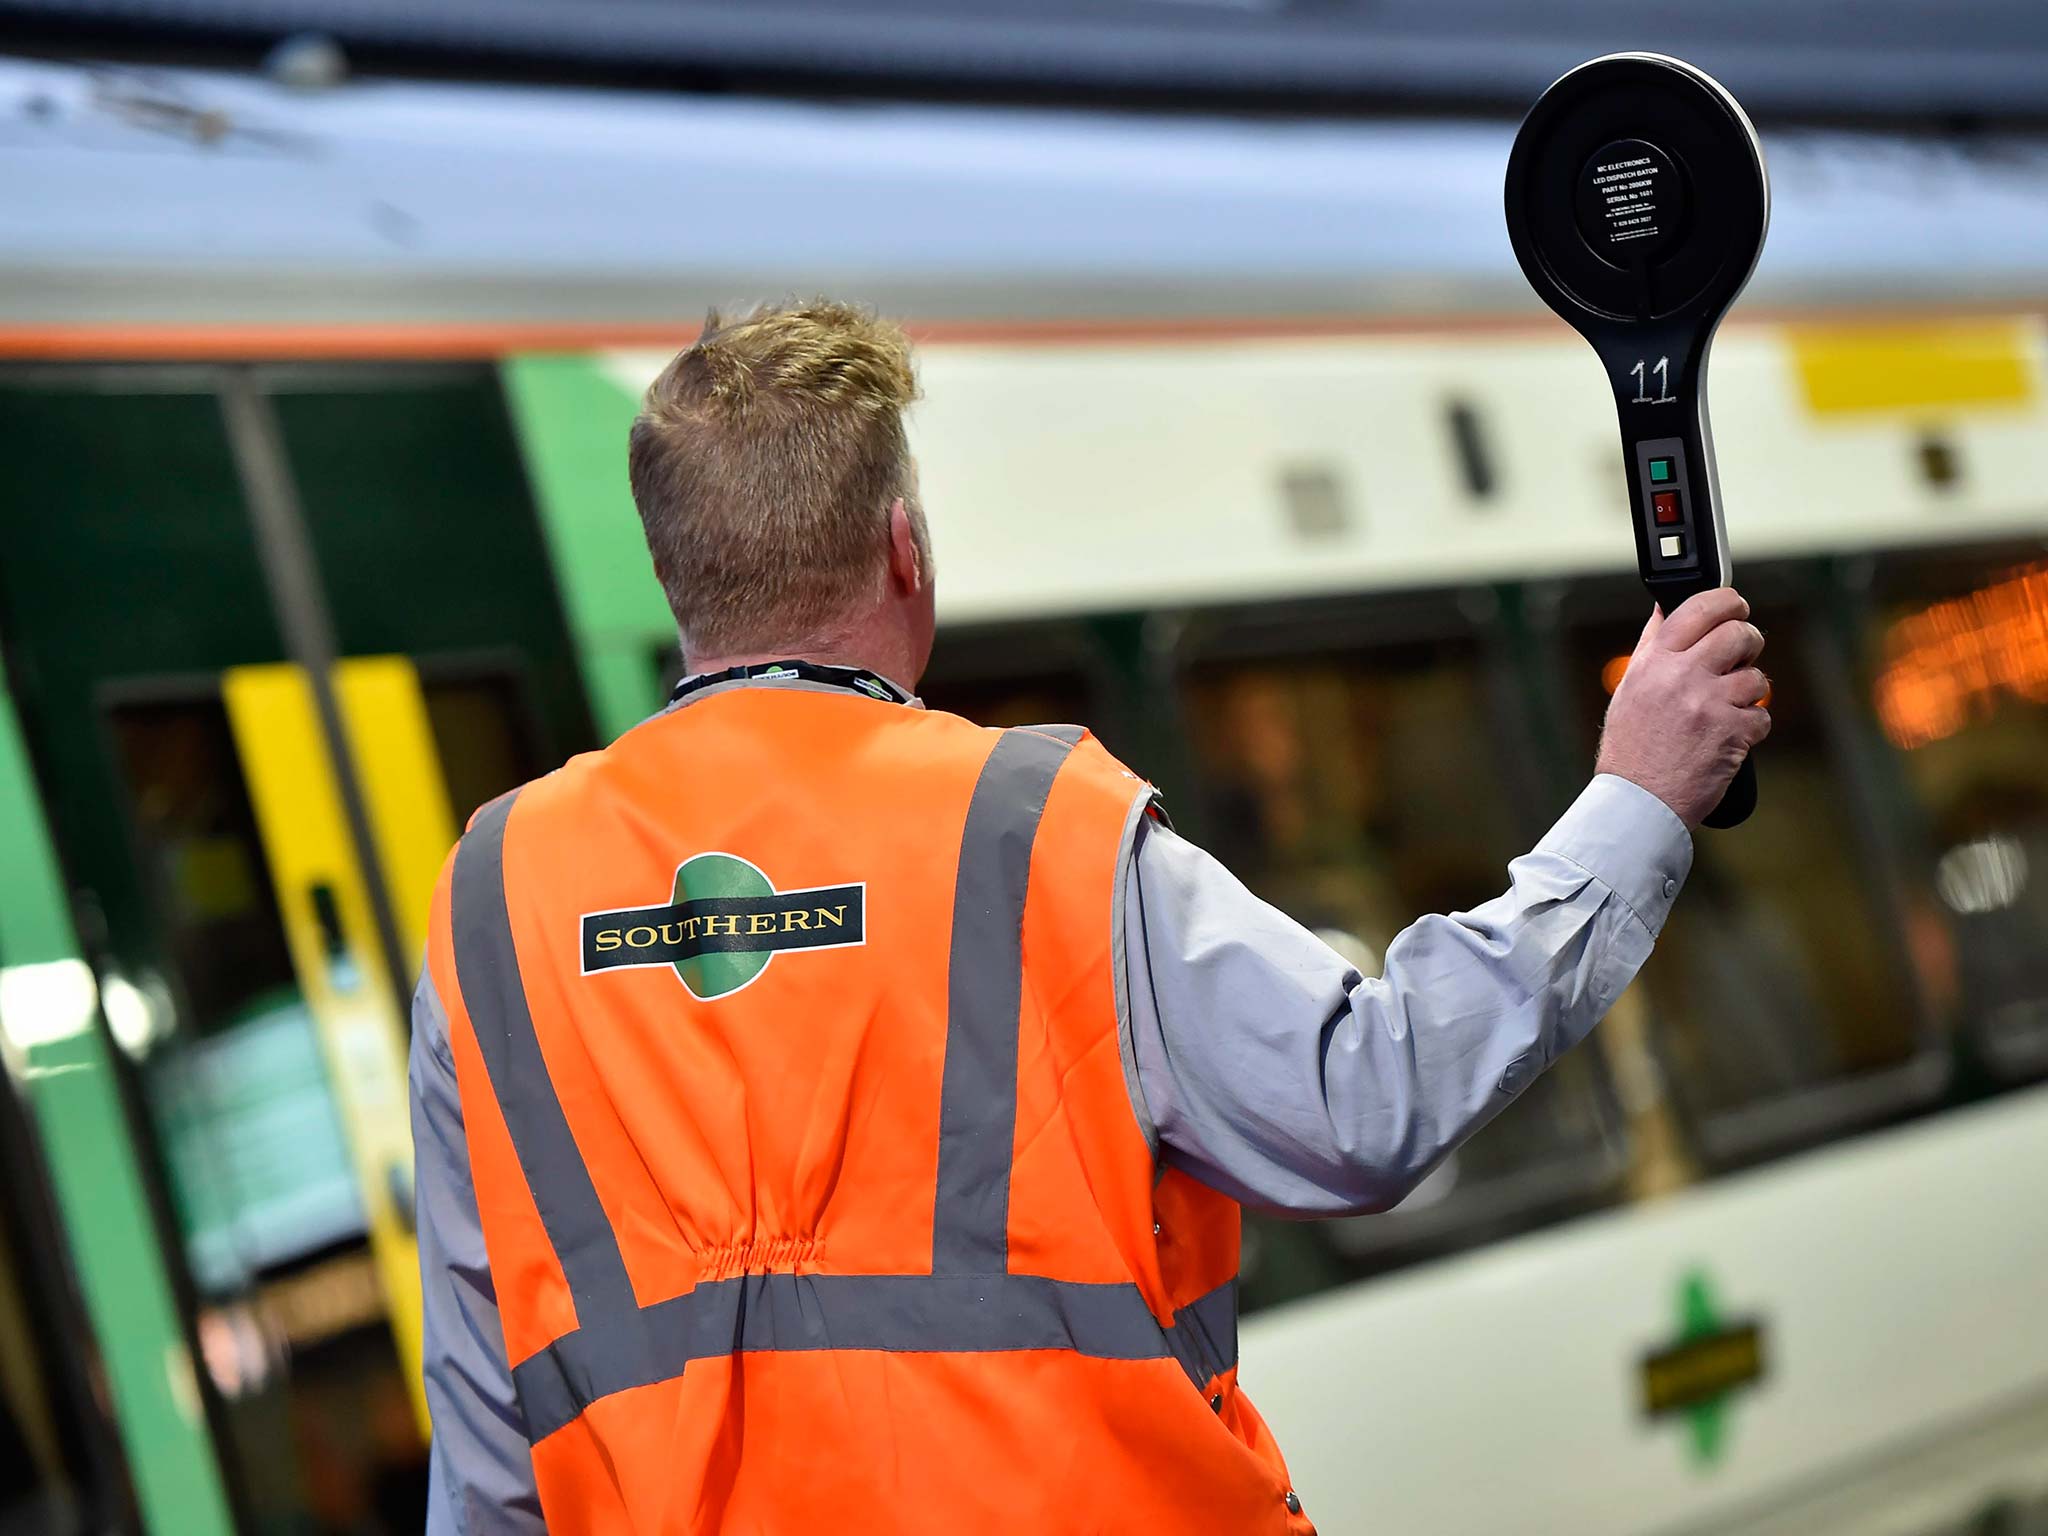 The RMT leader at the heart of the Southern Rail dispute said the government was to blame